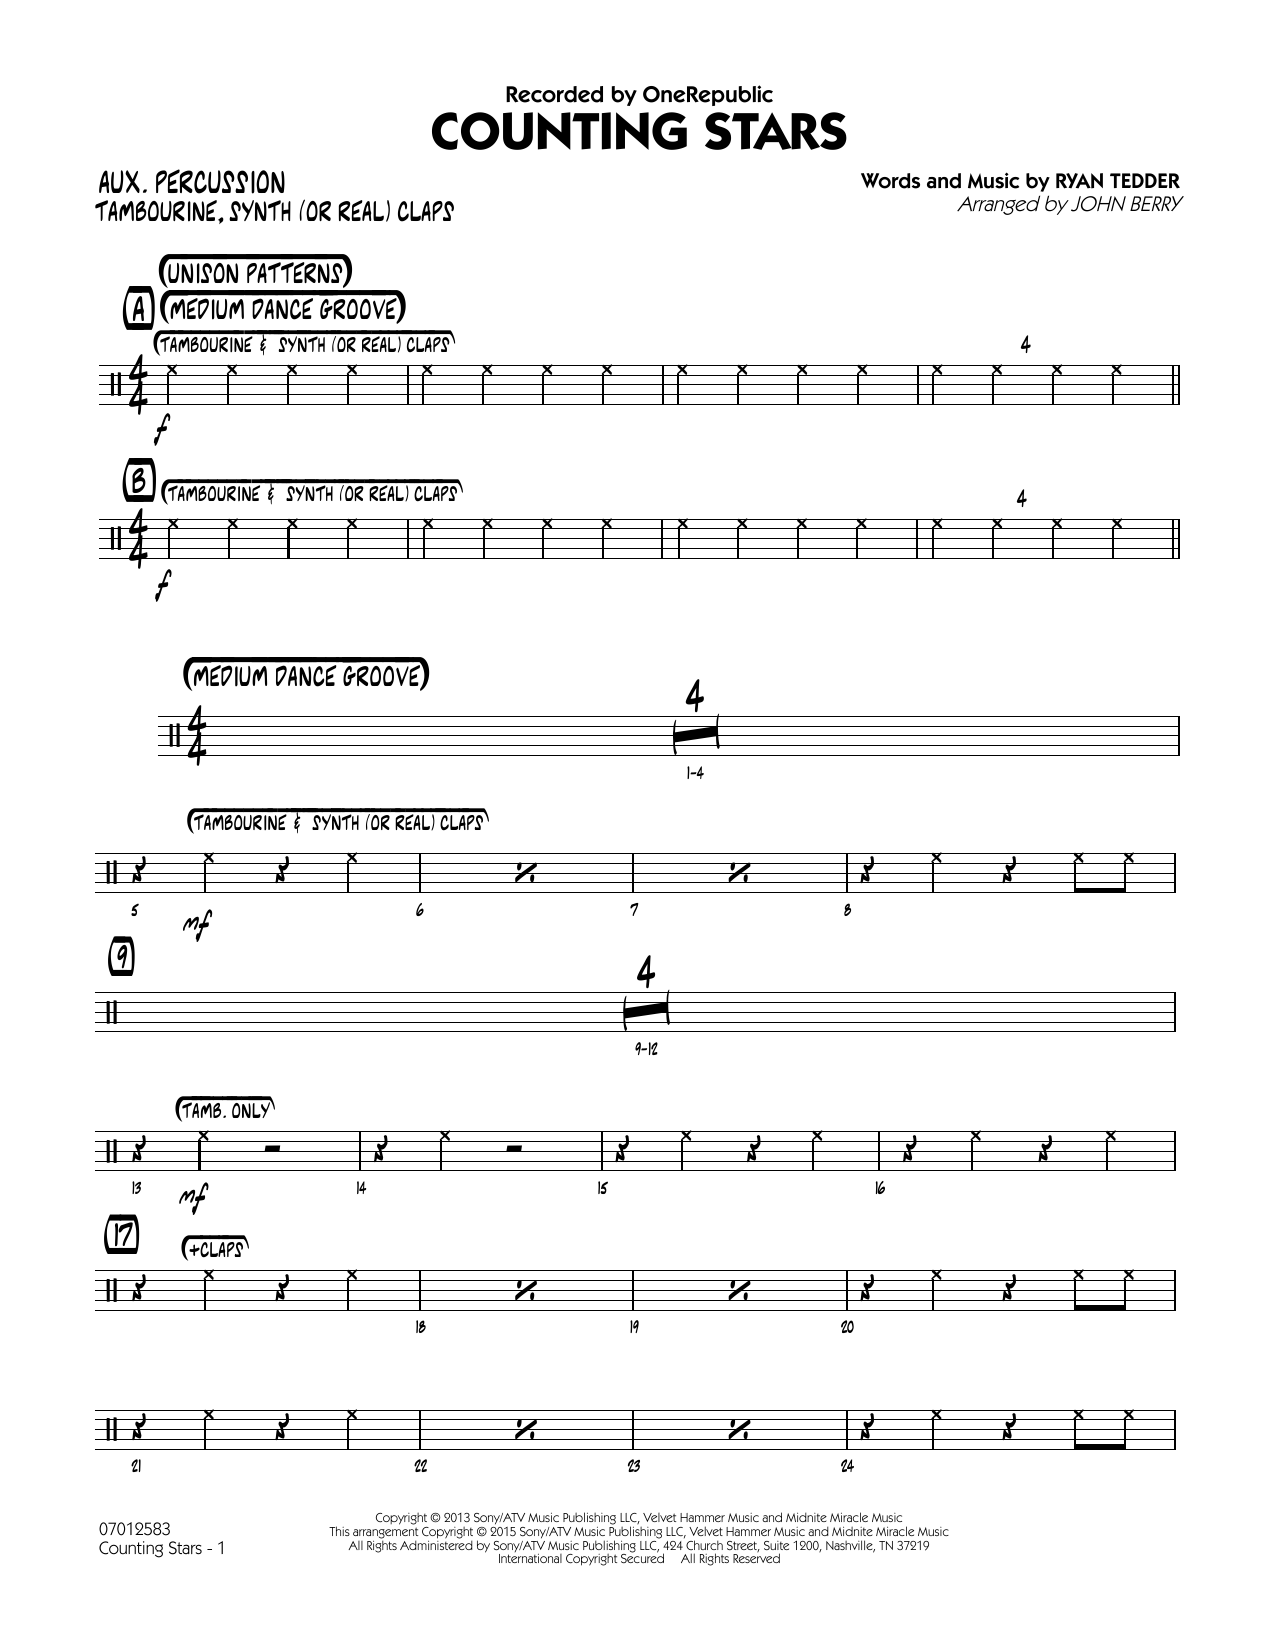 John Berry Counting Stars - Aux Percussion sheet music notes and chords. Download Printable PDF.